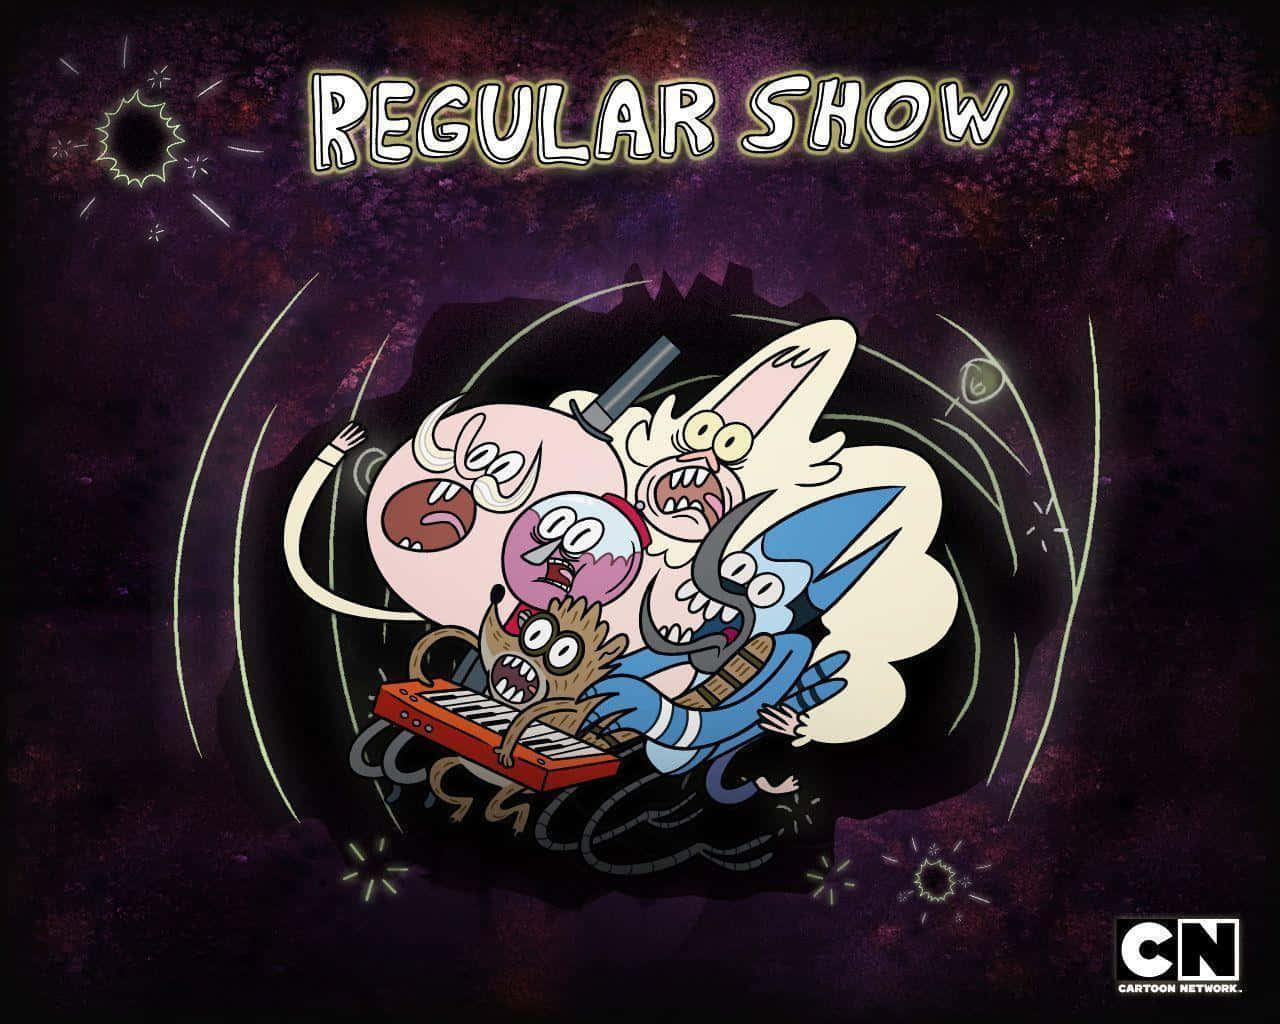 The dynamic duo, Mordecai and Rigby, embark on thrilling adventures in a colorful world from Regular Show.